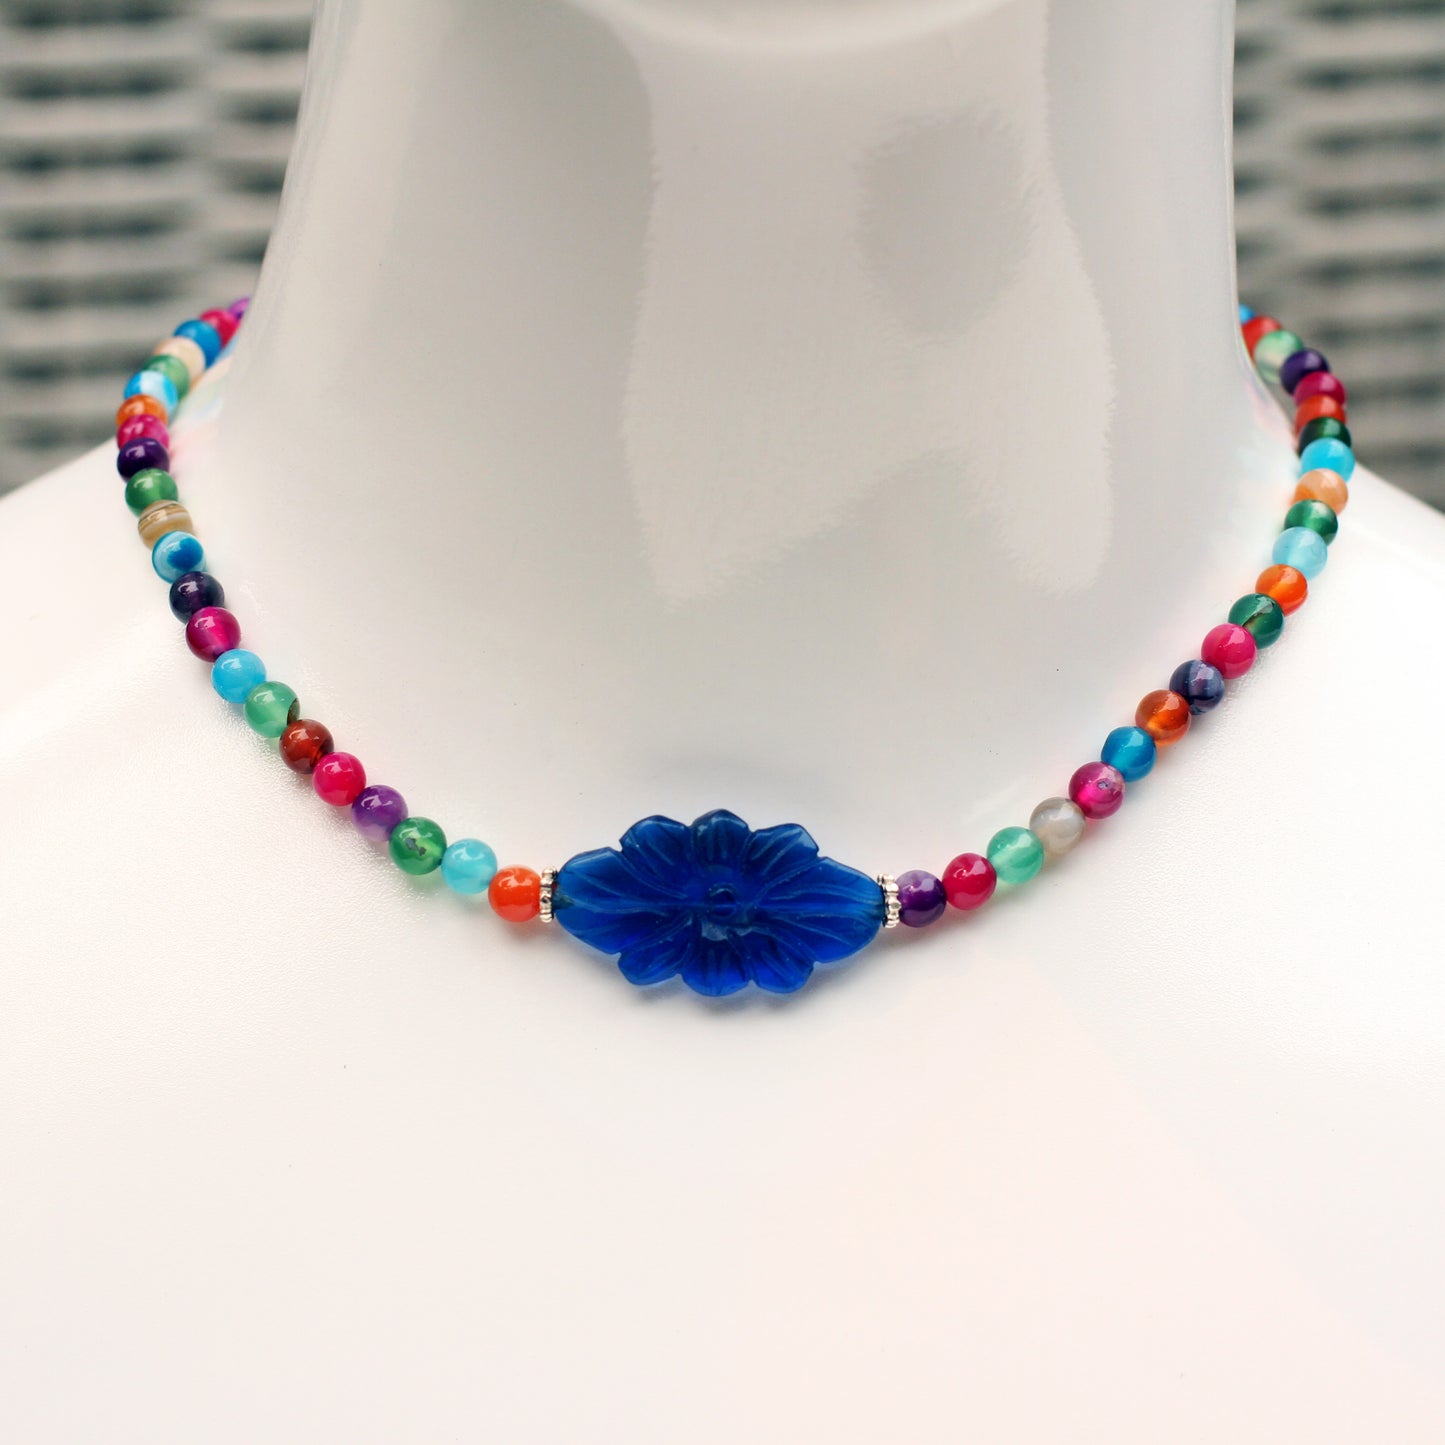 Multicolored Agate Gemstone Necklace with Carved Blue Agate Flower Pendant